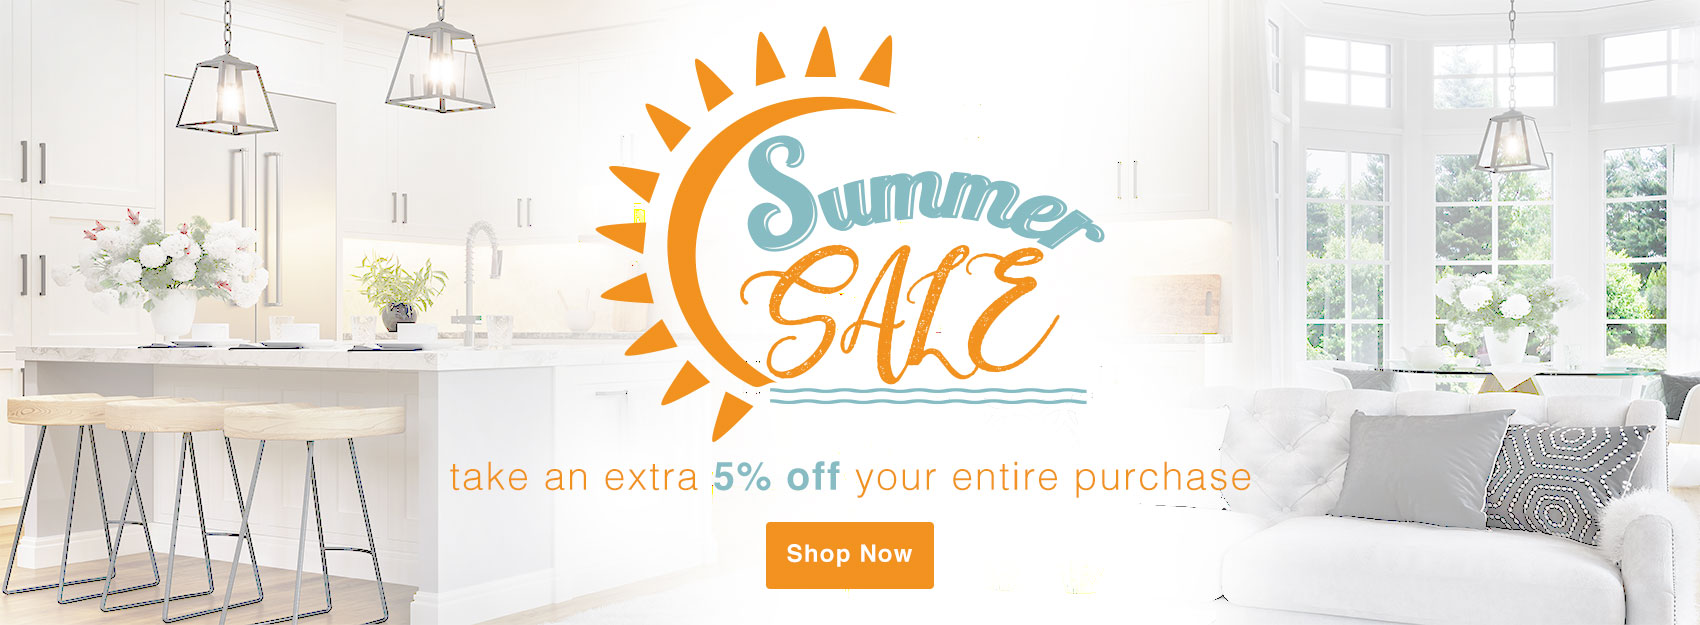 Save up to 25% and take an extra 5% off your entire order as part of the Simply Summer Sale Event.